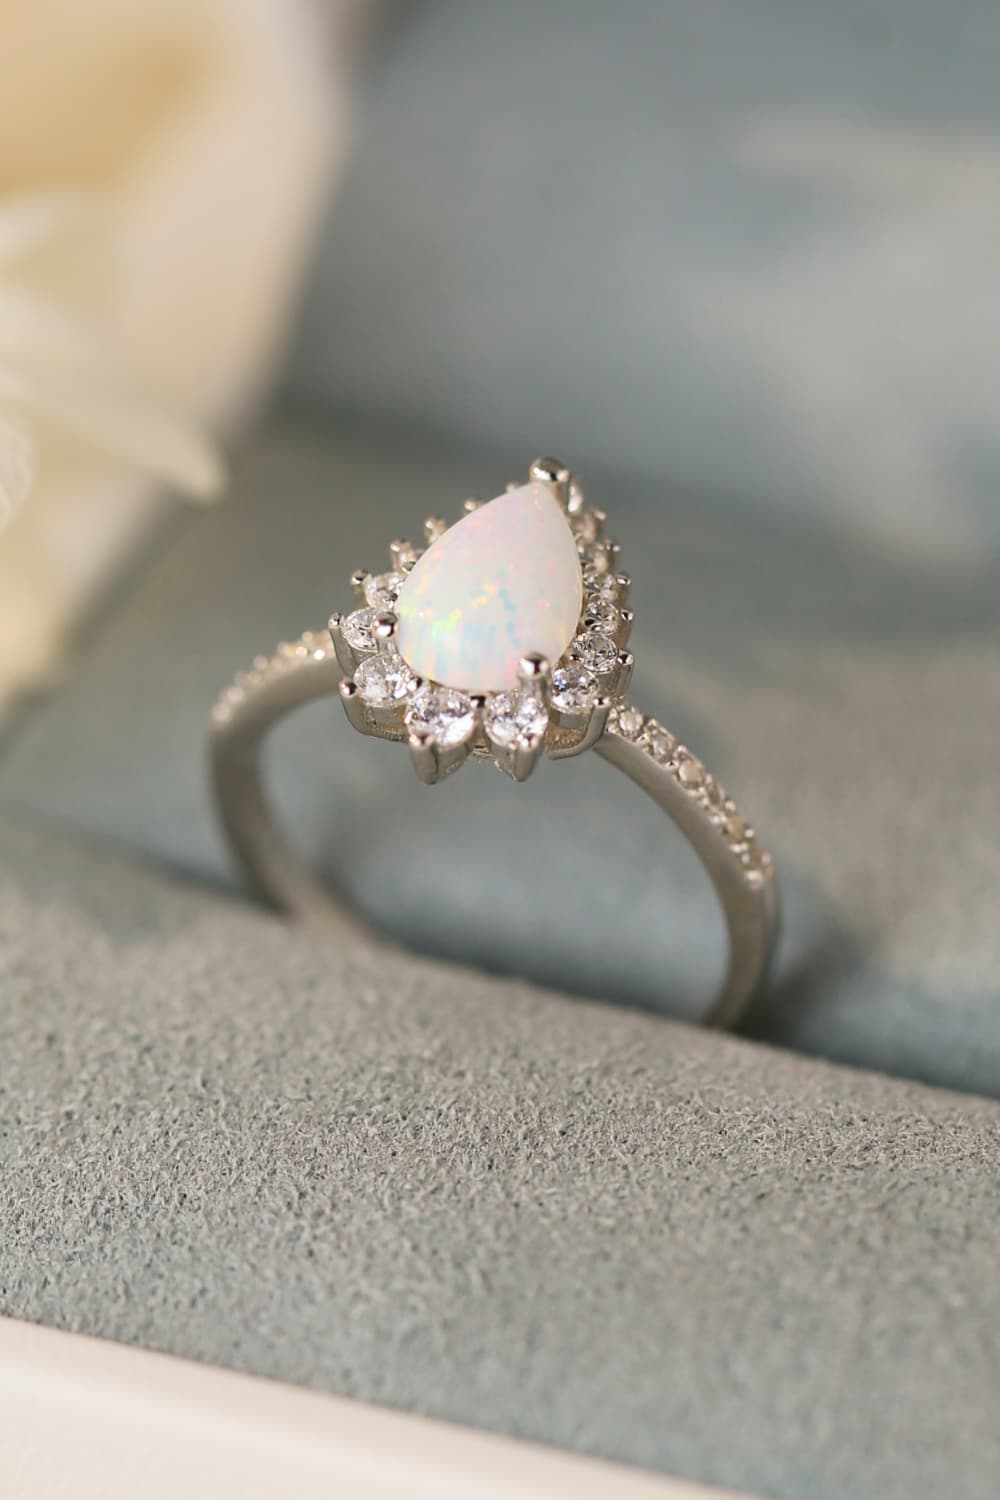 Platinum-Plated Opal Pear Shape Ring - Tophatter Shopping Deals - Electronics, Jewelry, Auction, App, Bidding, Gadgets, Fashion